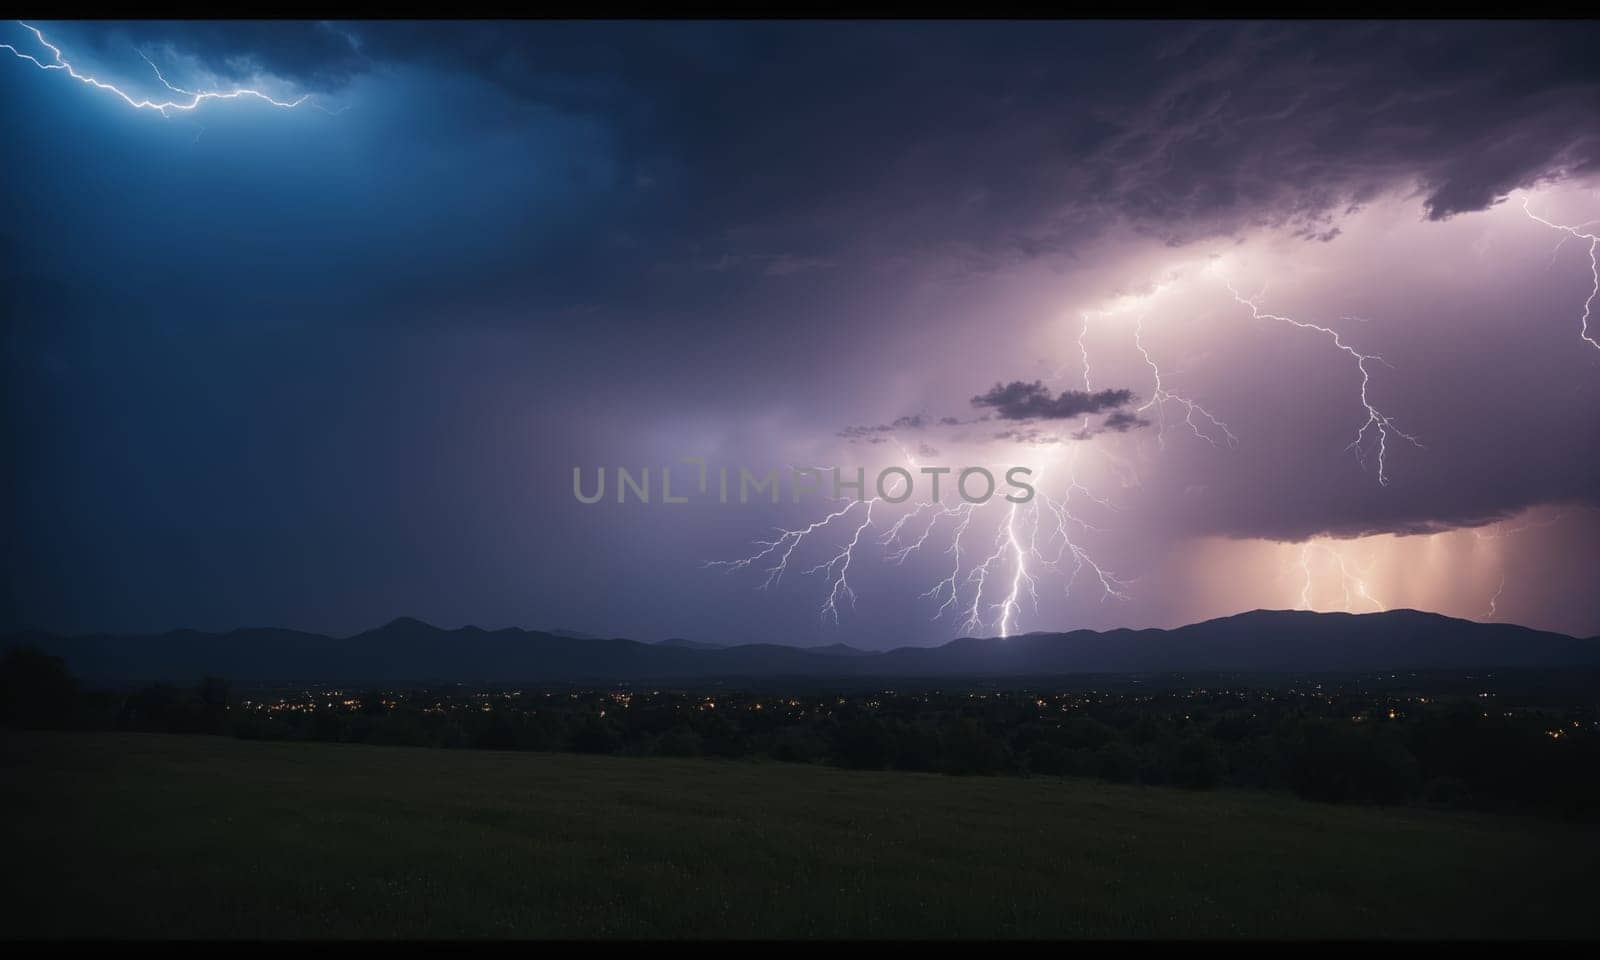 Lightning in the night sky. Night thunderstorm by Andre1ns